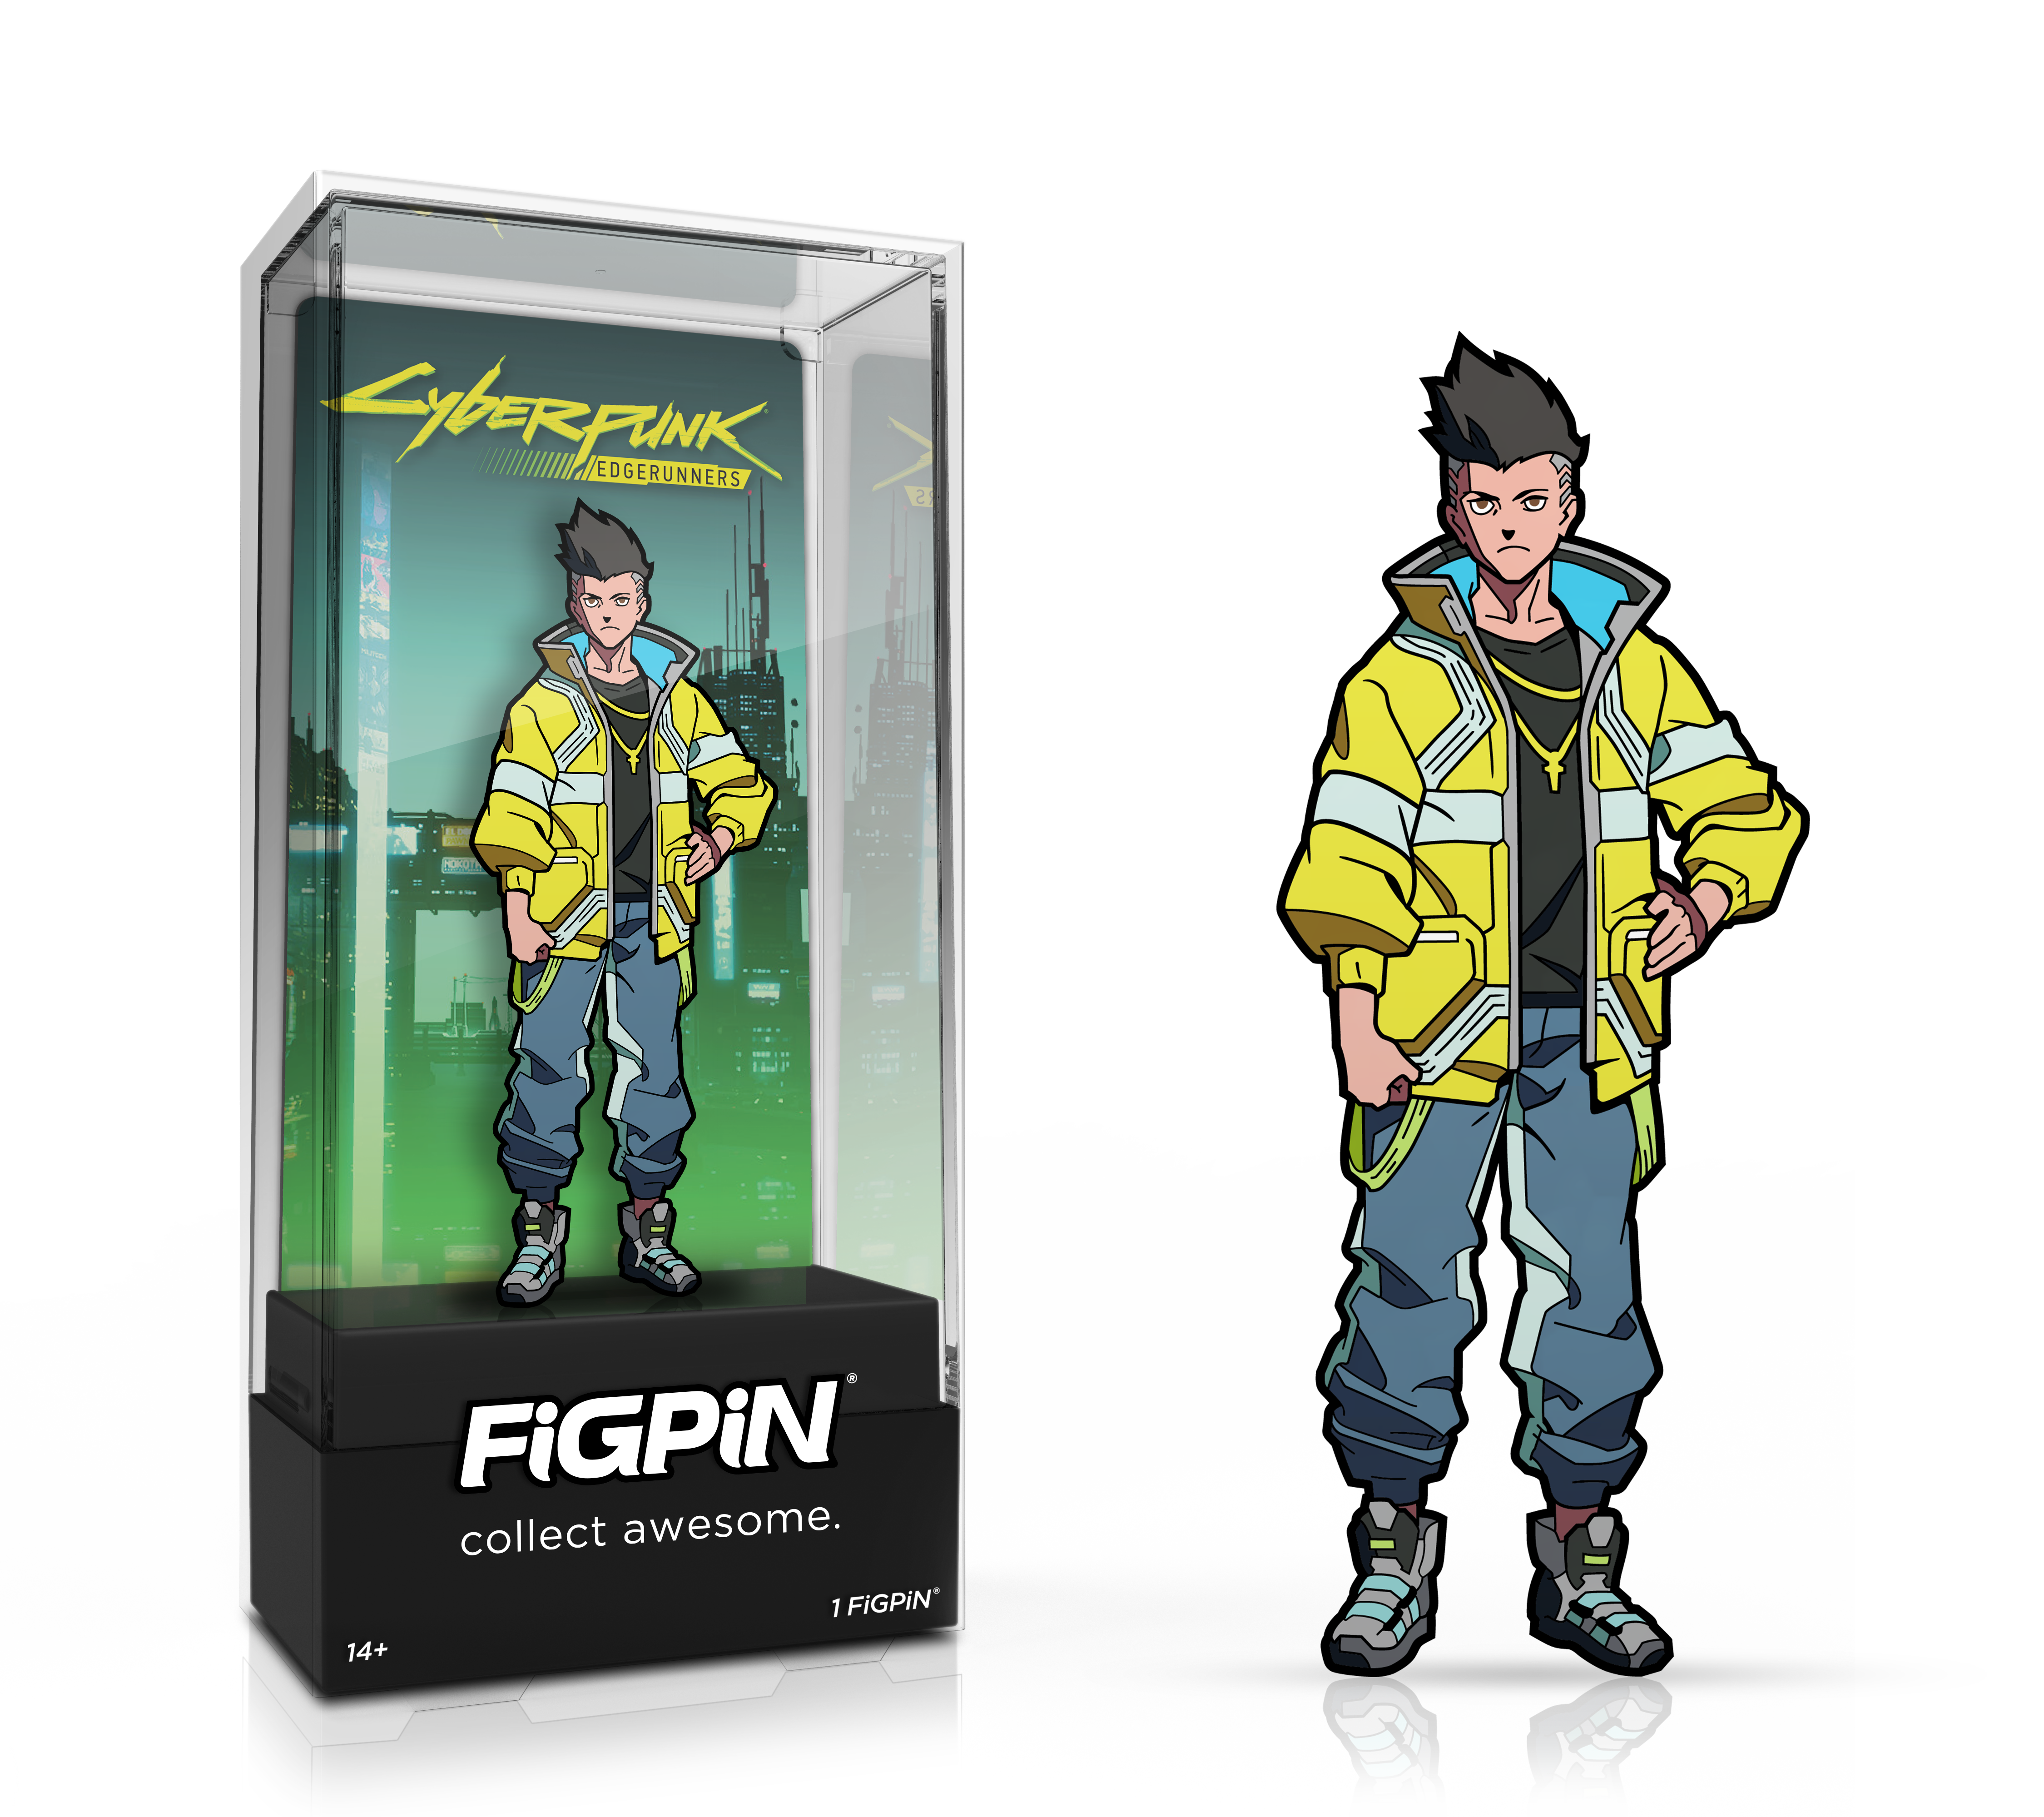 Side by side view of the David Martinez enamel pin in display case and the art render.